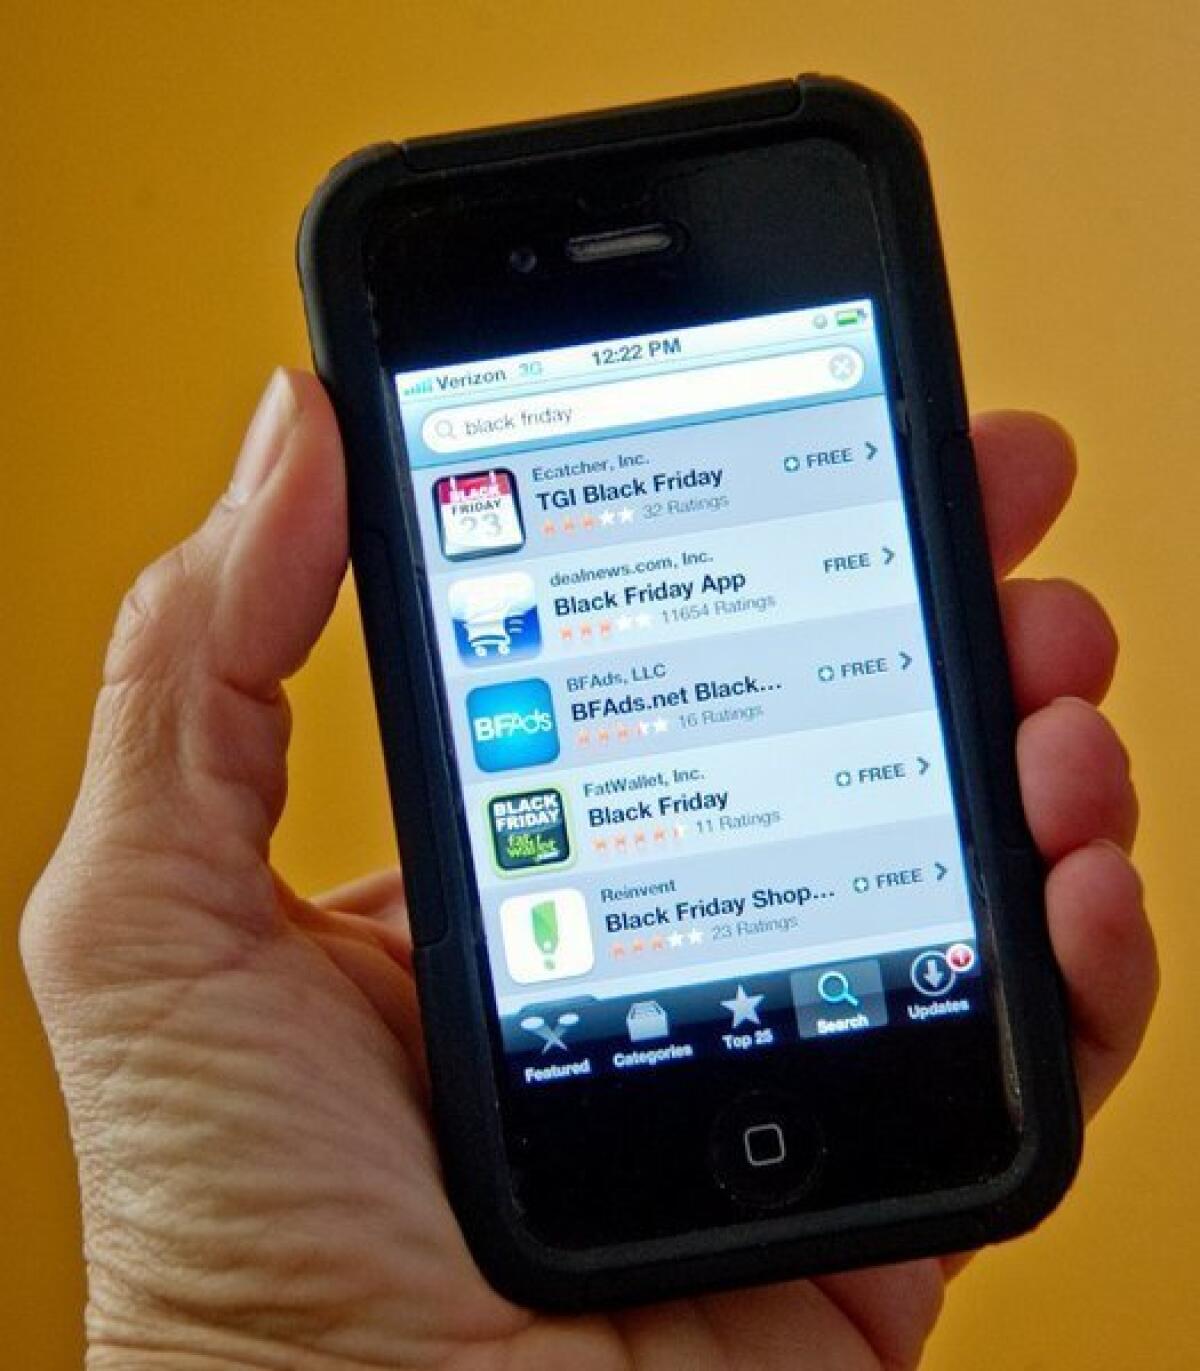 A photo illustration of the Apple App Store on the iPhone 4S.